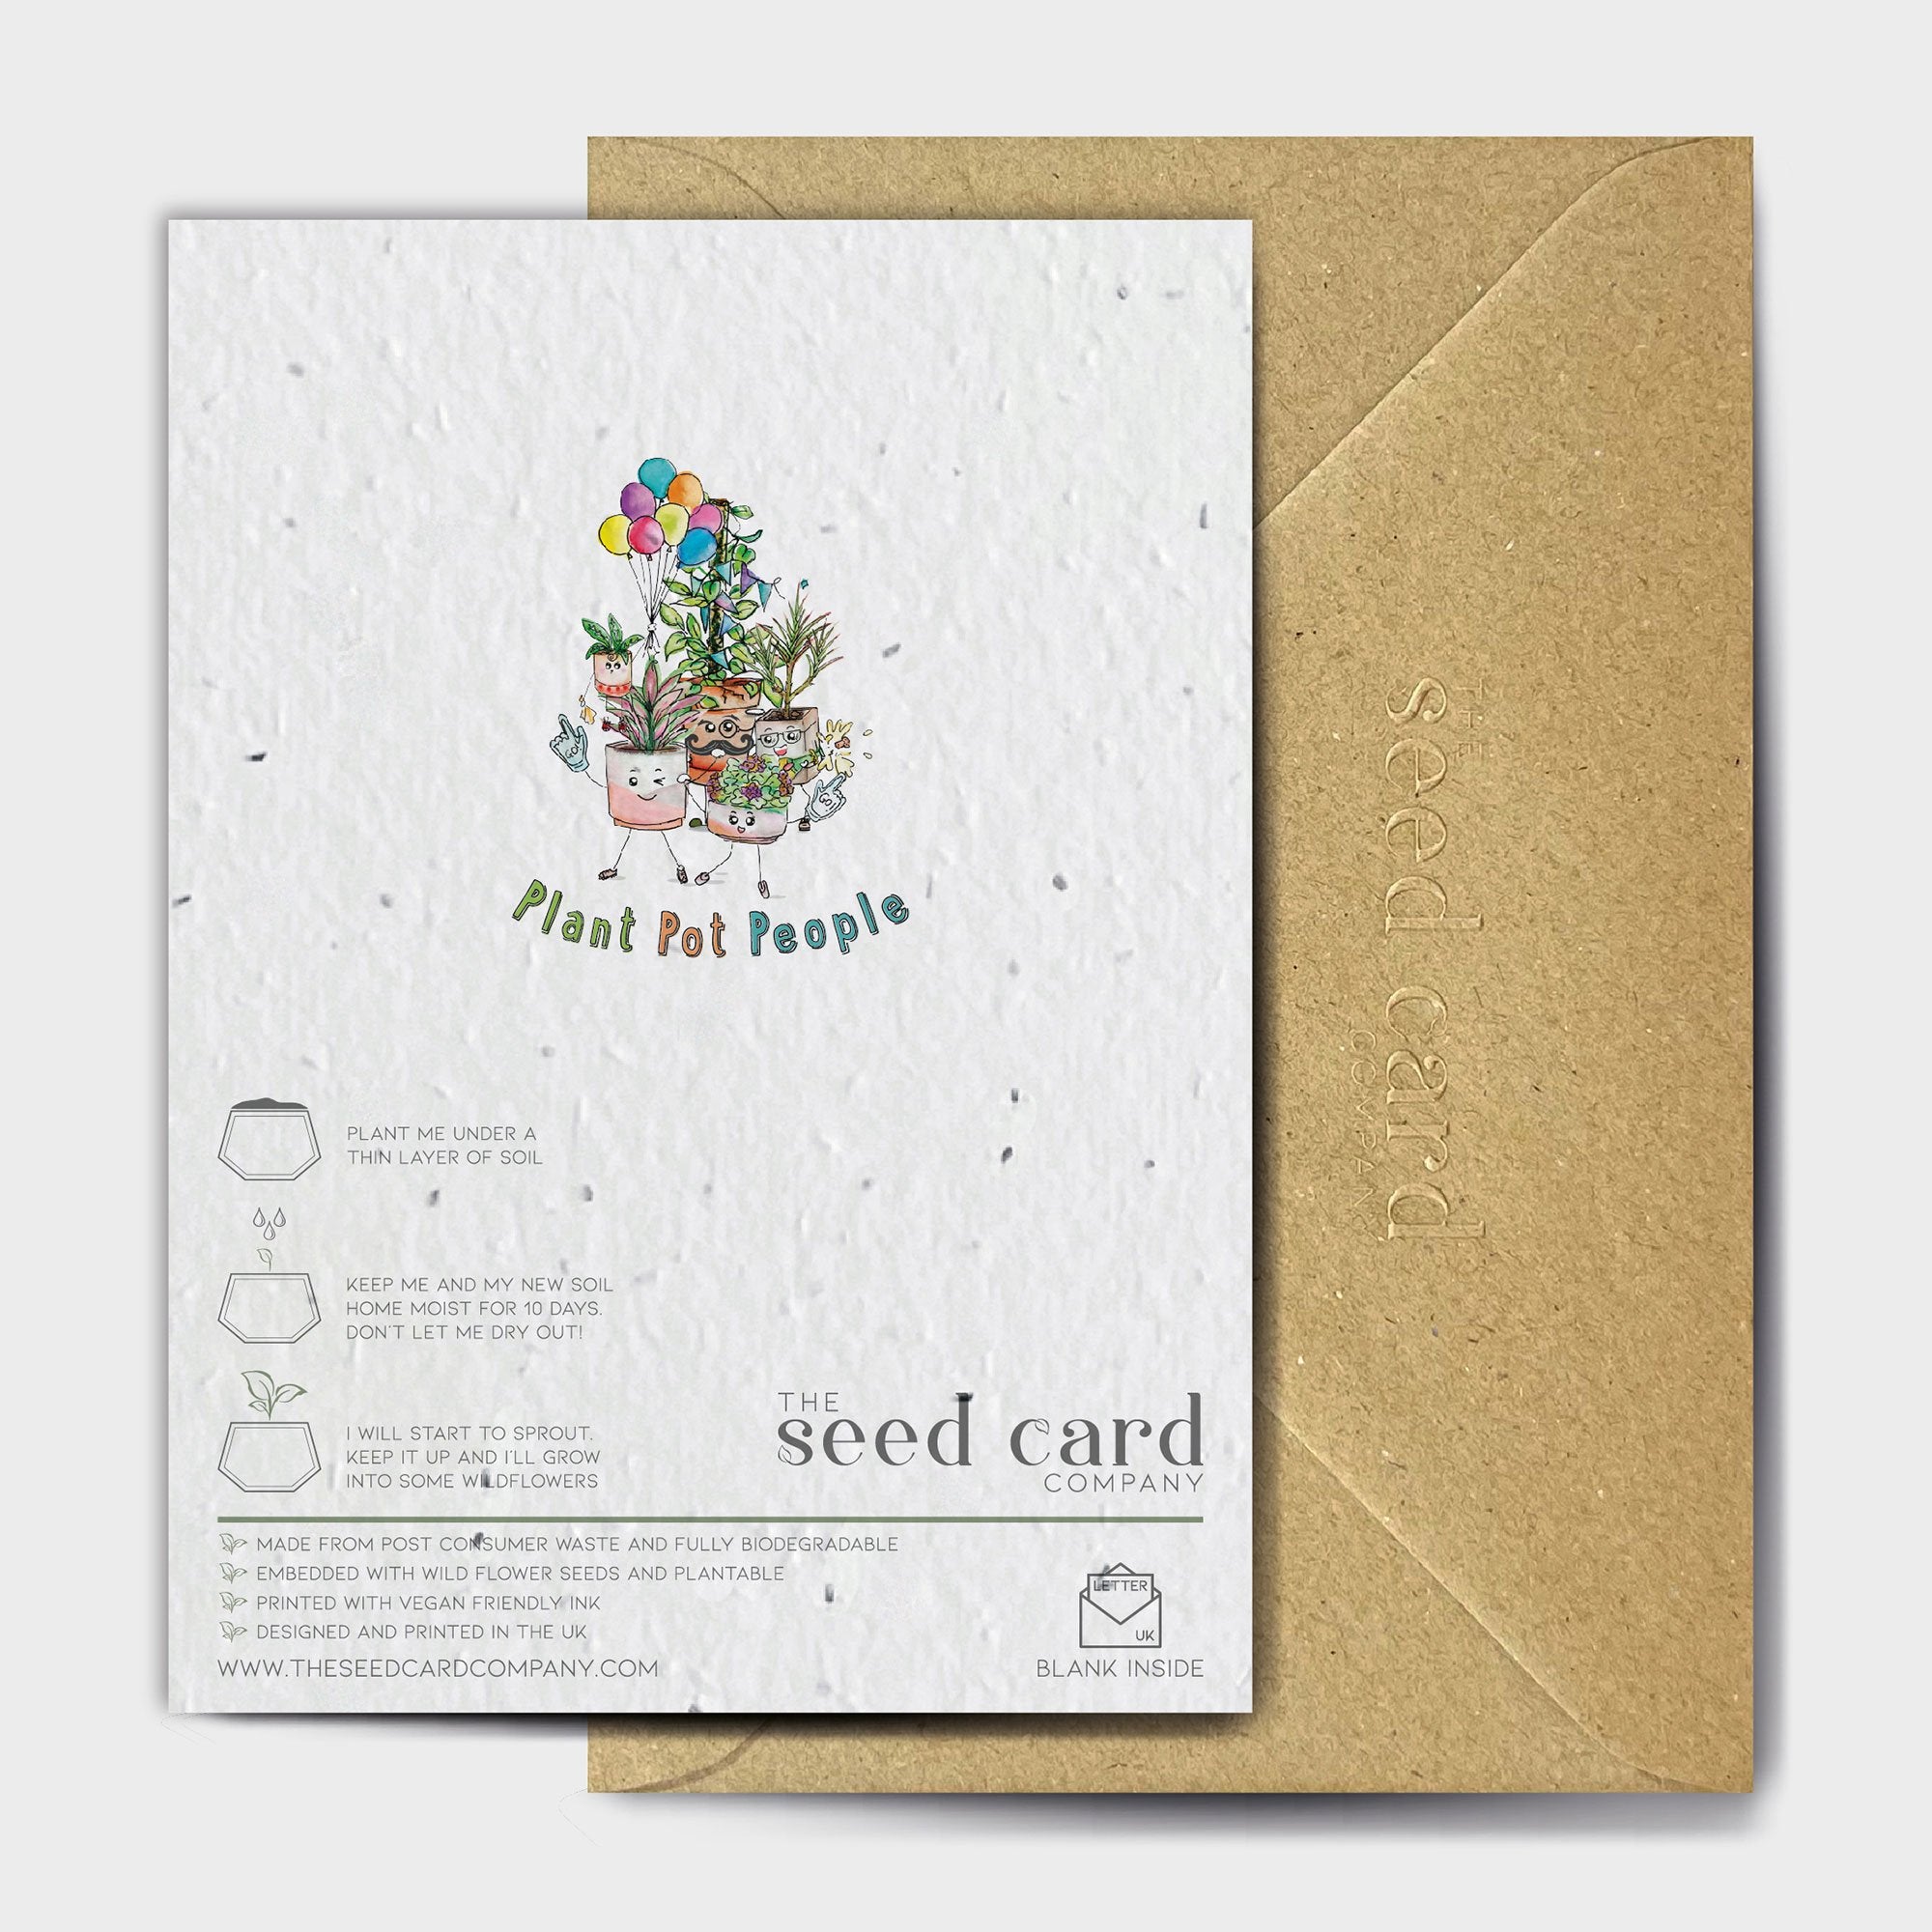 Shop online New Heights - 100% biodegradable seed-embedded cards Shop -The Seed Card Company